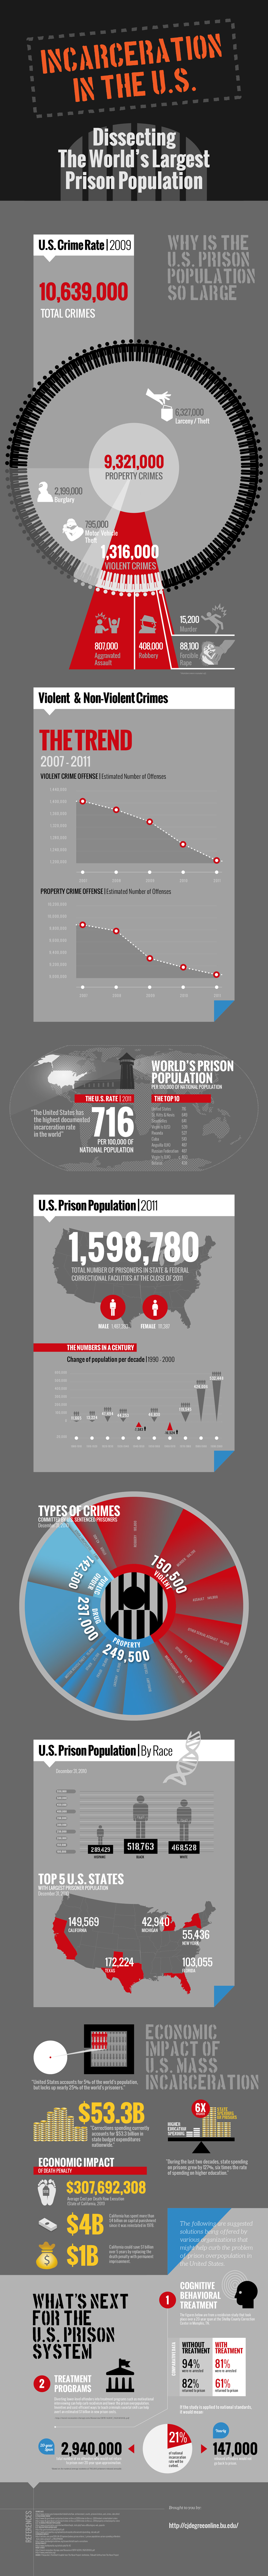 Incarceration in the US